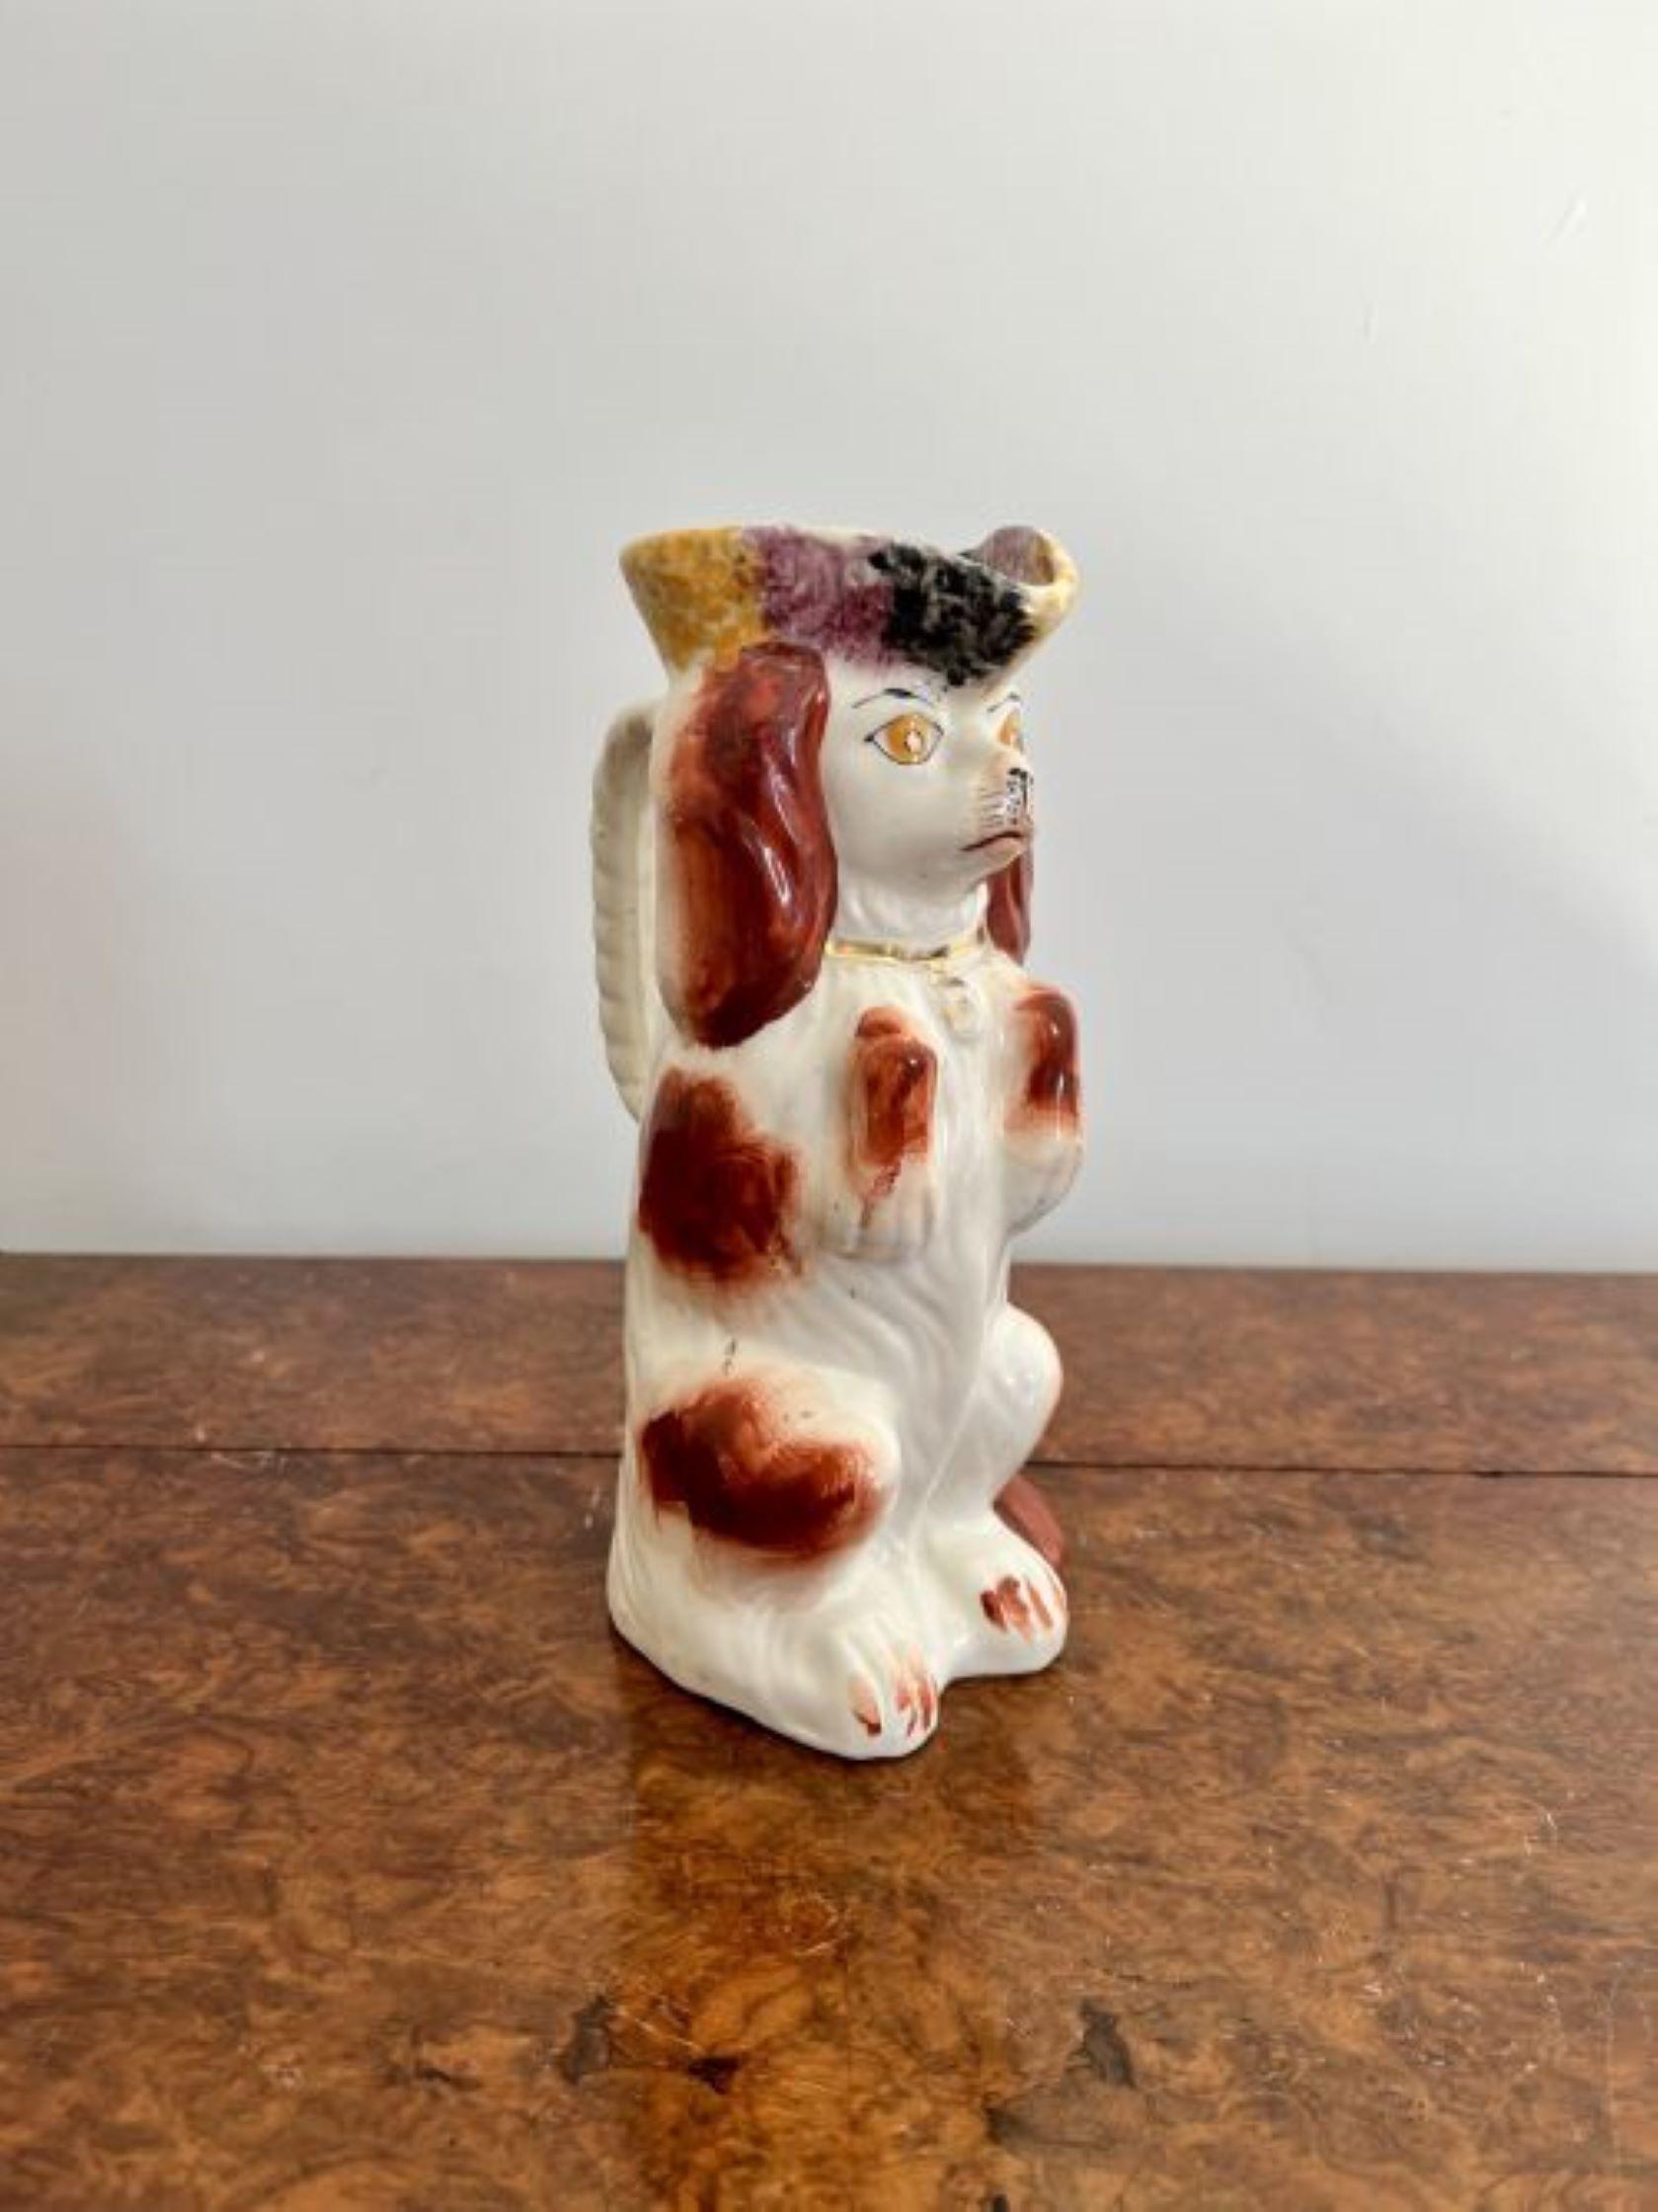 Antique Victorian Staffordshire Toby Jug of a spaniel, Having a hand painted Red and White coloured coat, with a gold collar and padlock, standing upright.